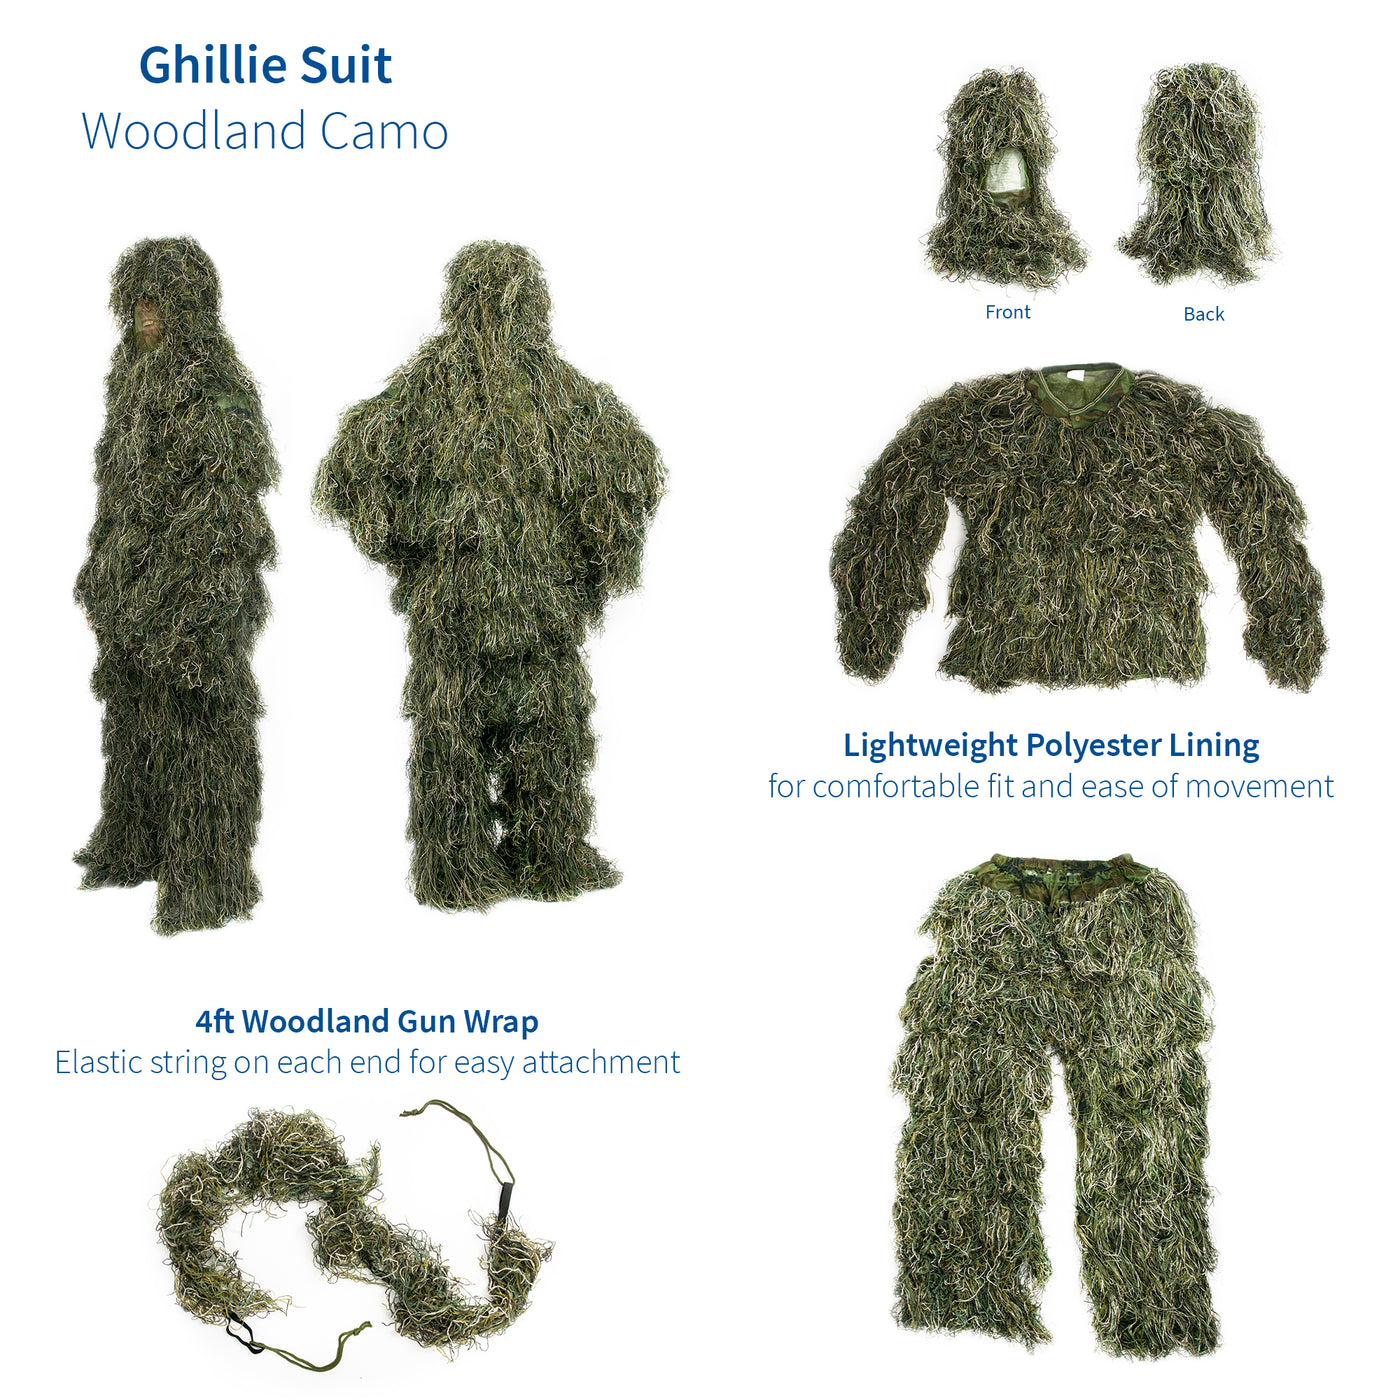 Ghillie suit with a variety of pieces for full coverage.